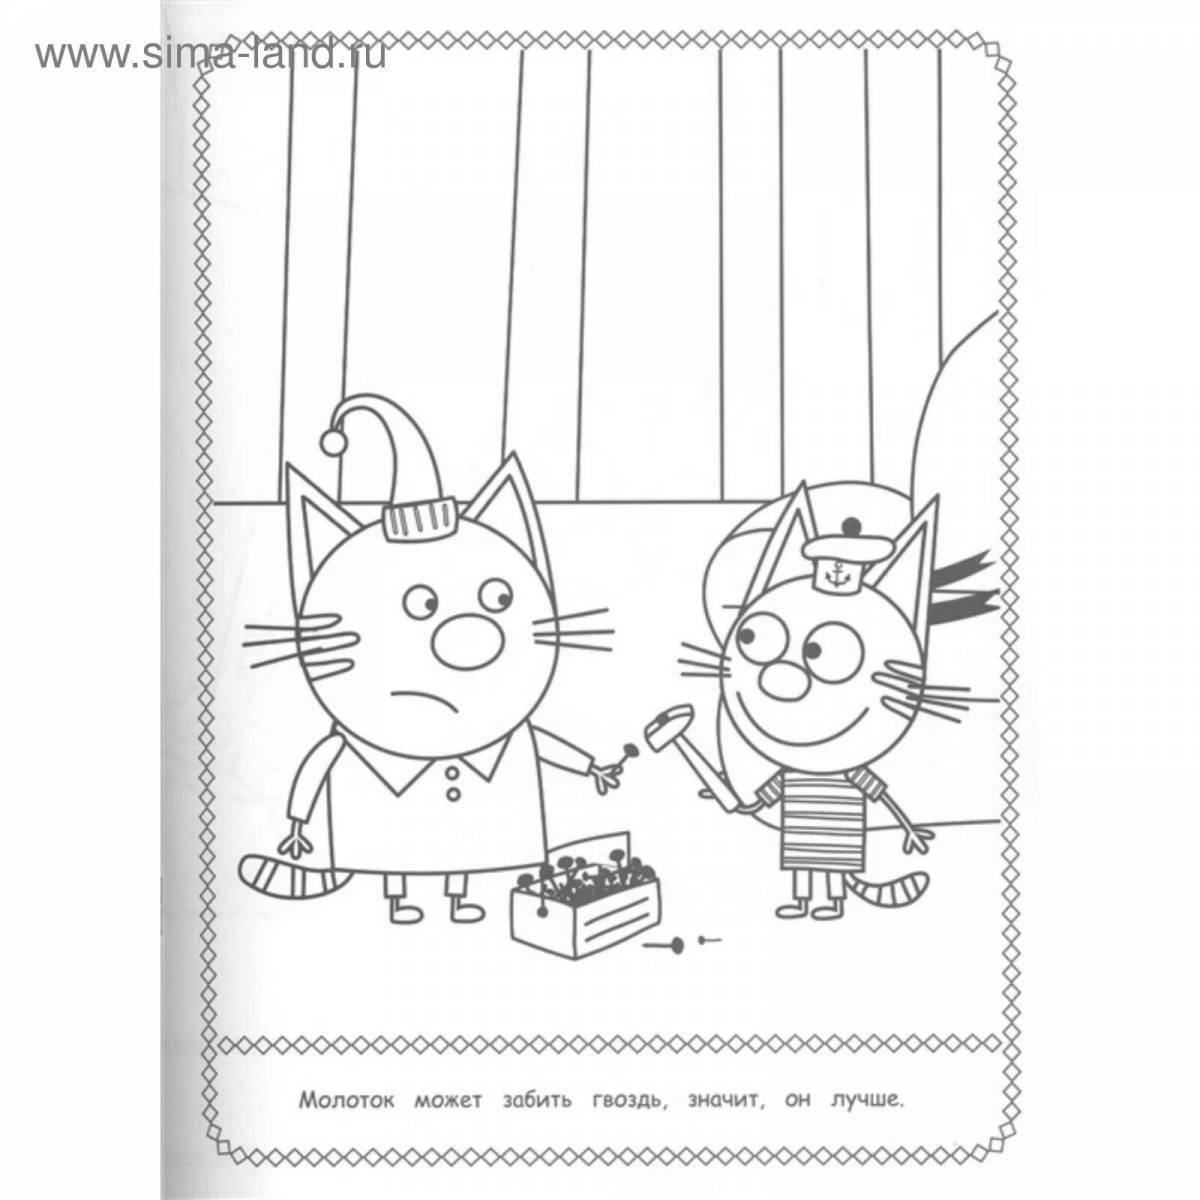 Rough three cats Christmas coloring book